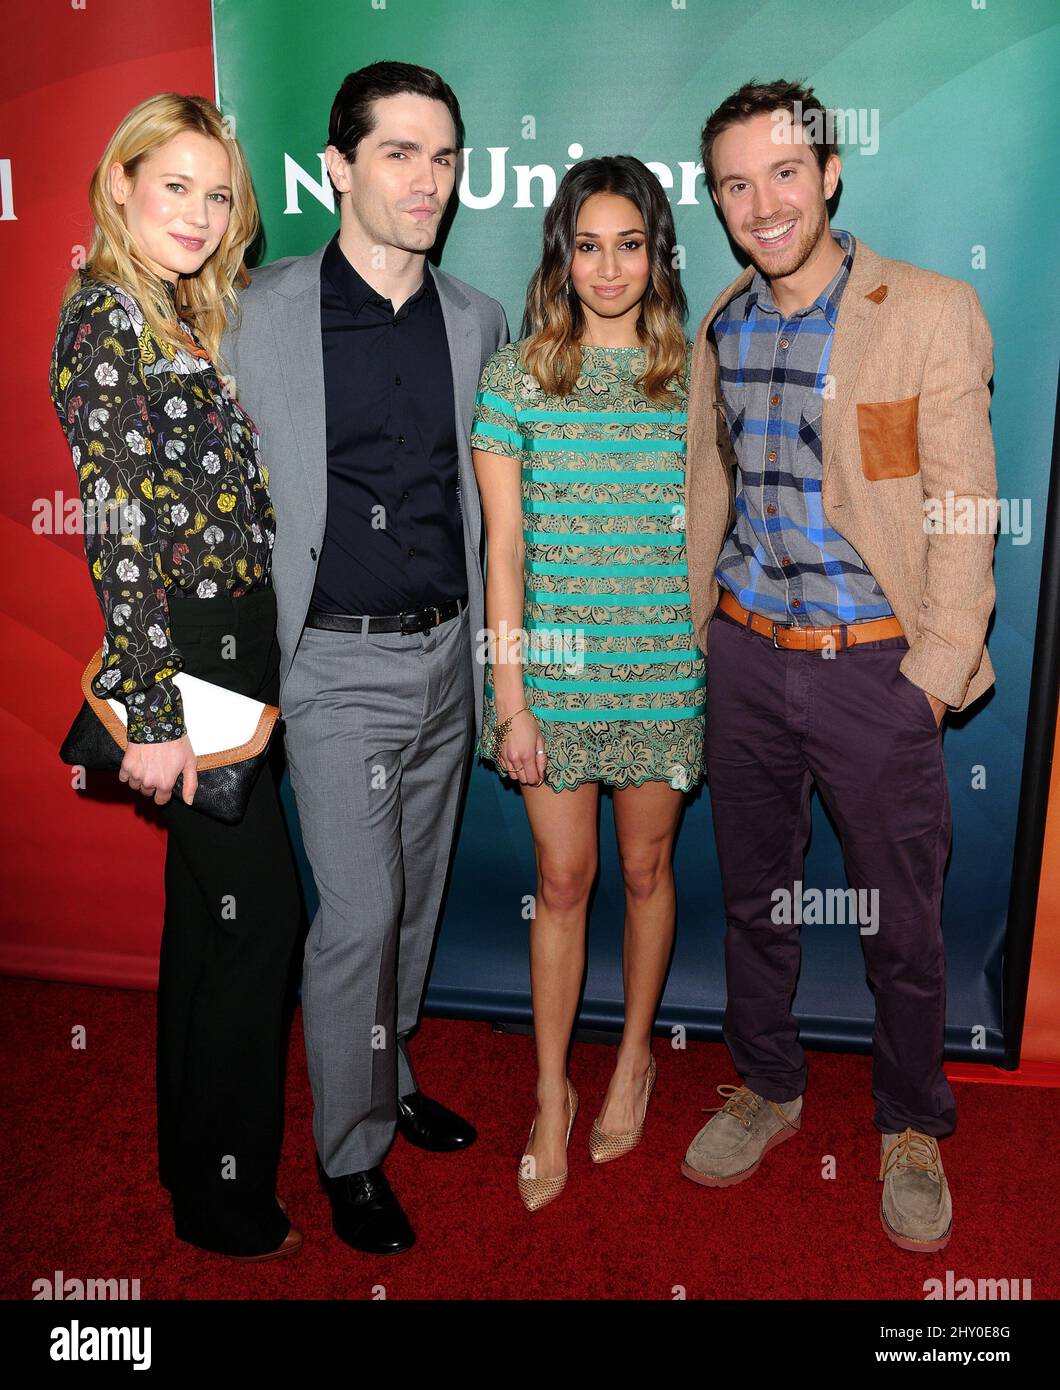 Kristen Hager, Sam Witwer, Meaghan Rath and Sam Huntington attending day 2 of the NBC Universal TCA Press Tour in Los Angeles, California. Stock Photo